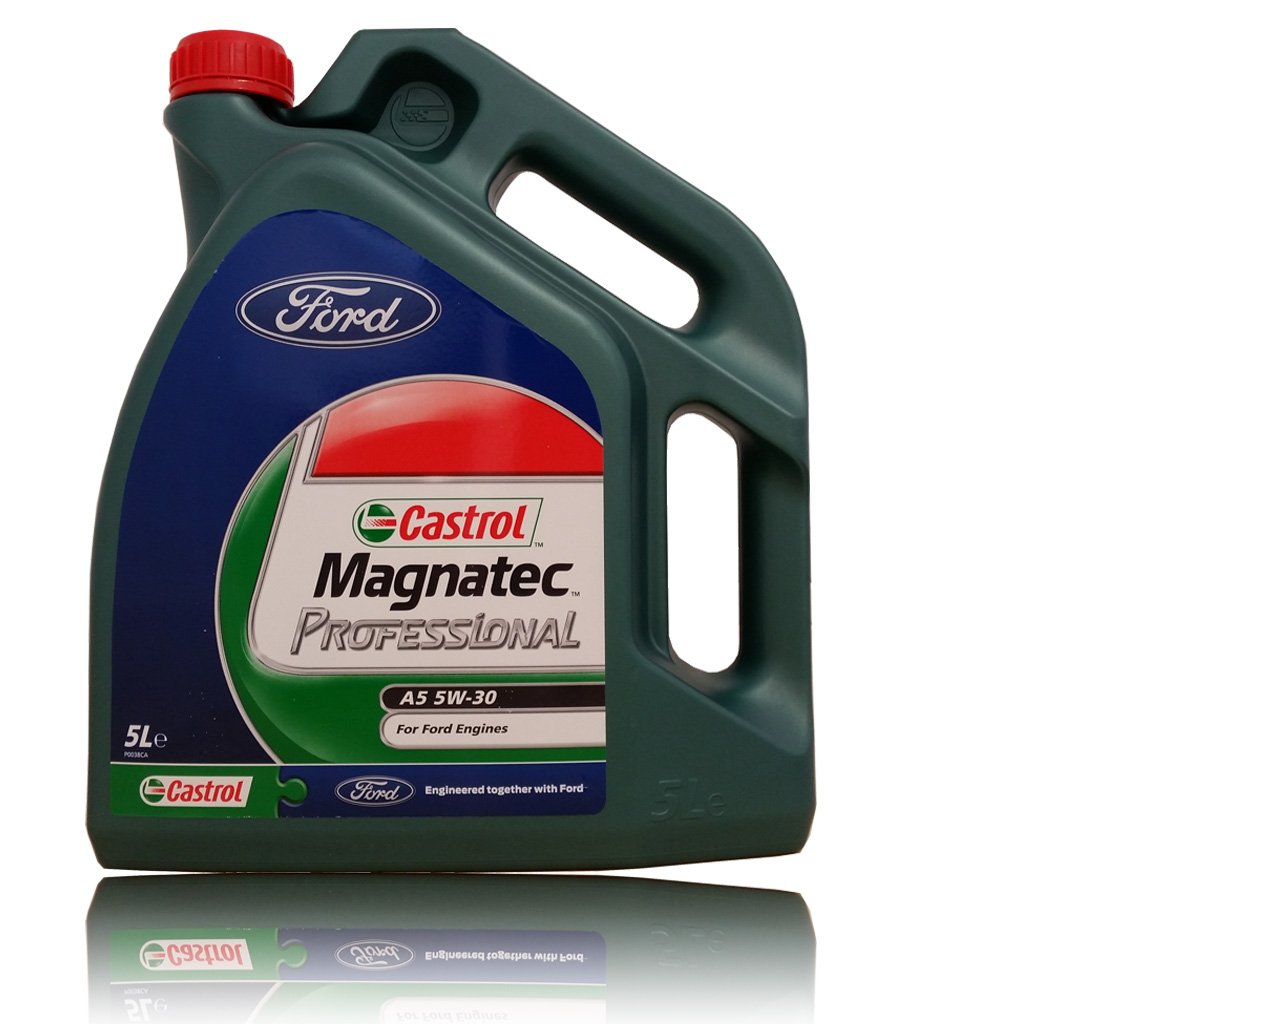 Масло castrol ford. Castrol Magnatec 5w30 Ford. Castrol Magnatec 5w30 a5 Ford. Ford-Castrol Magnatec professional e 5w-20. Масло моторное Magnatec professional Ford e 5w-20, 1 литр.